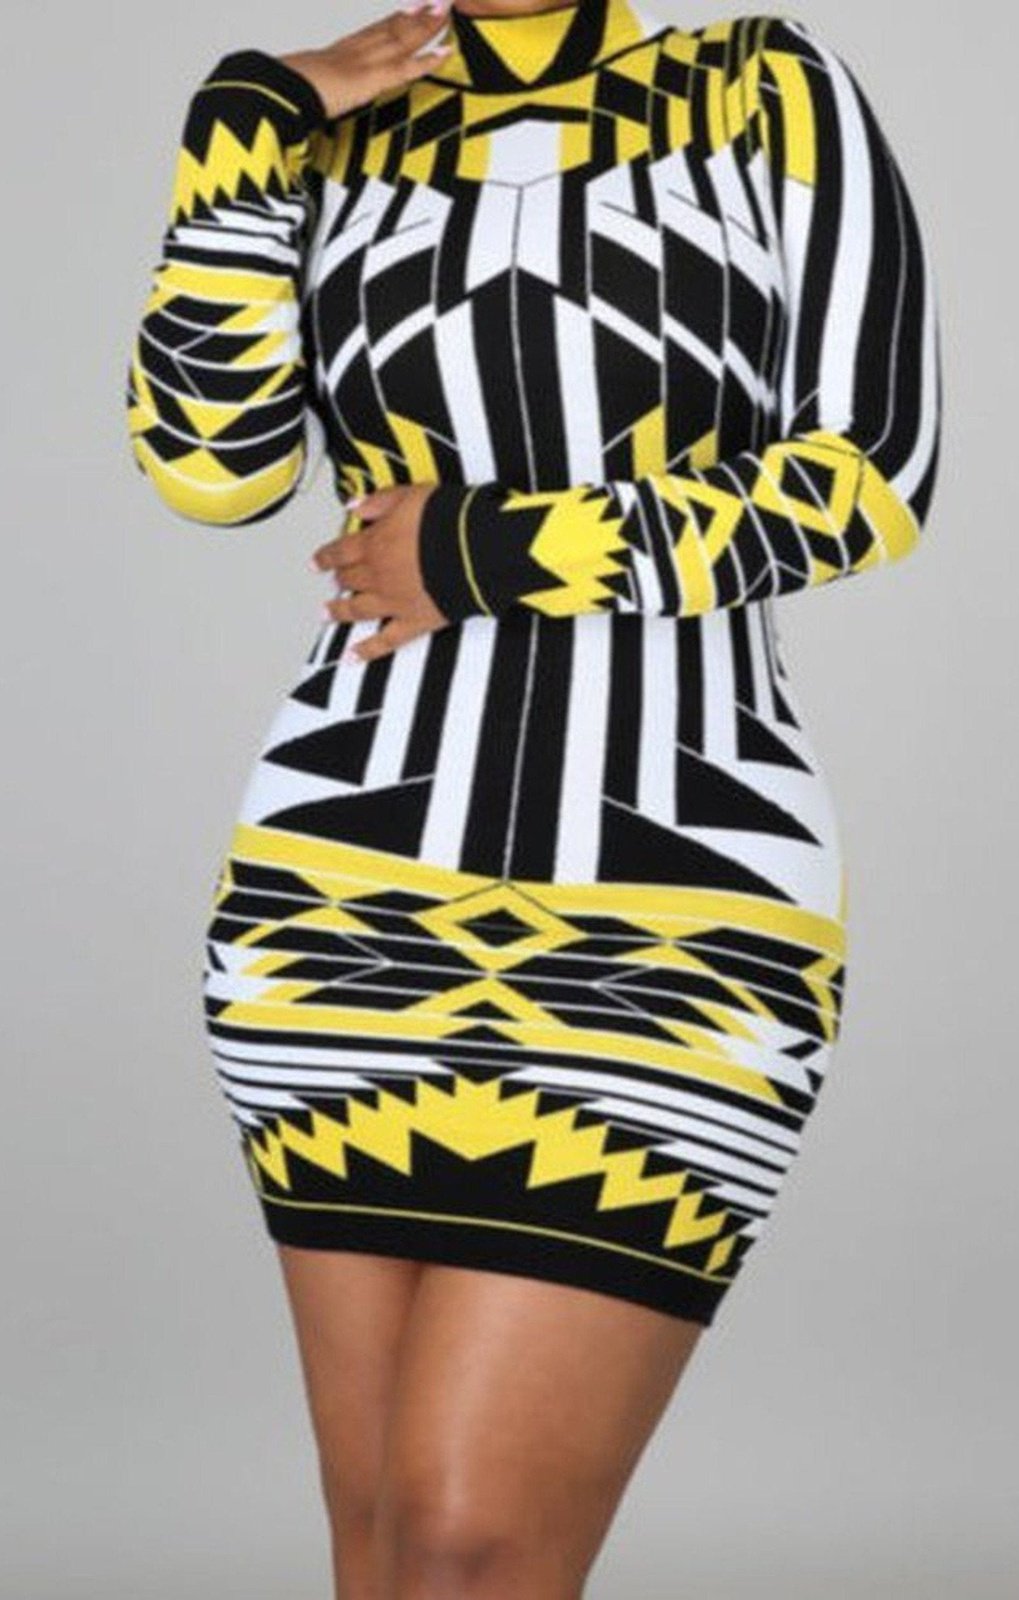 Printed zip-up stylish casual bodycon mini dress (front and back are wearable)